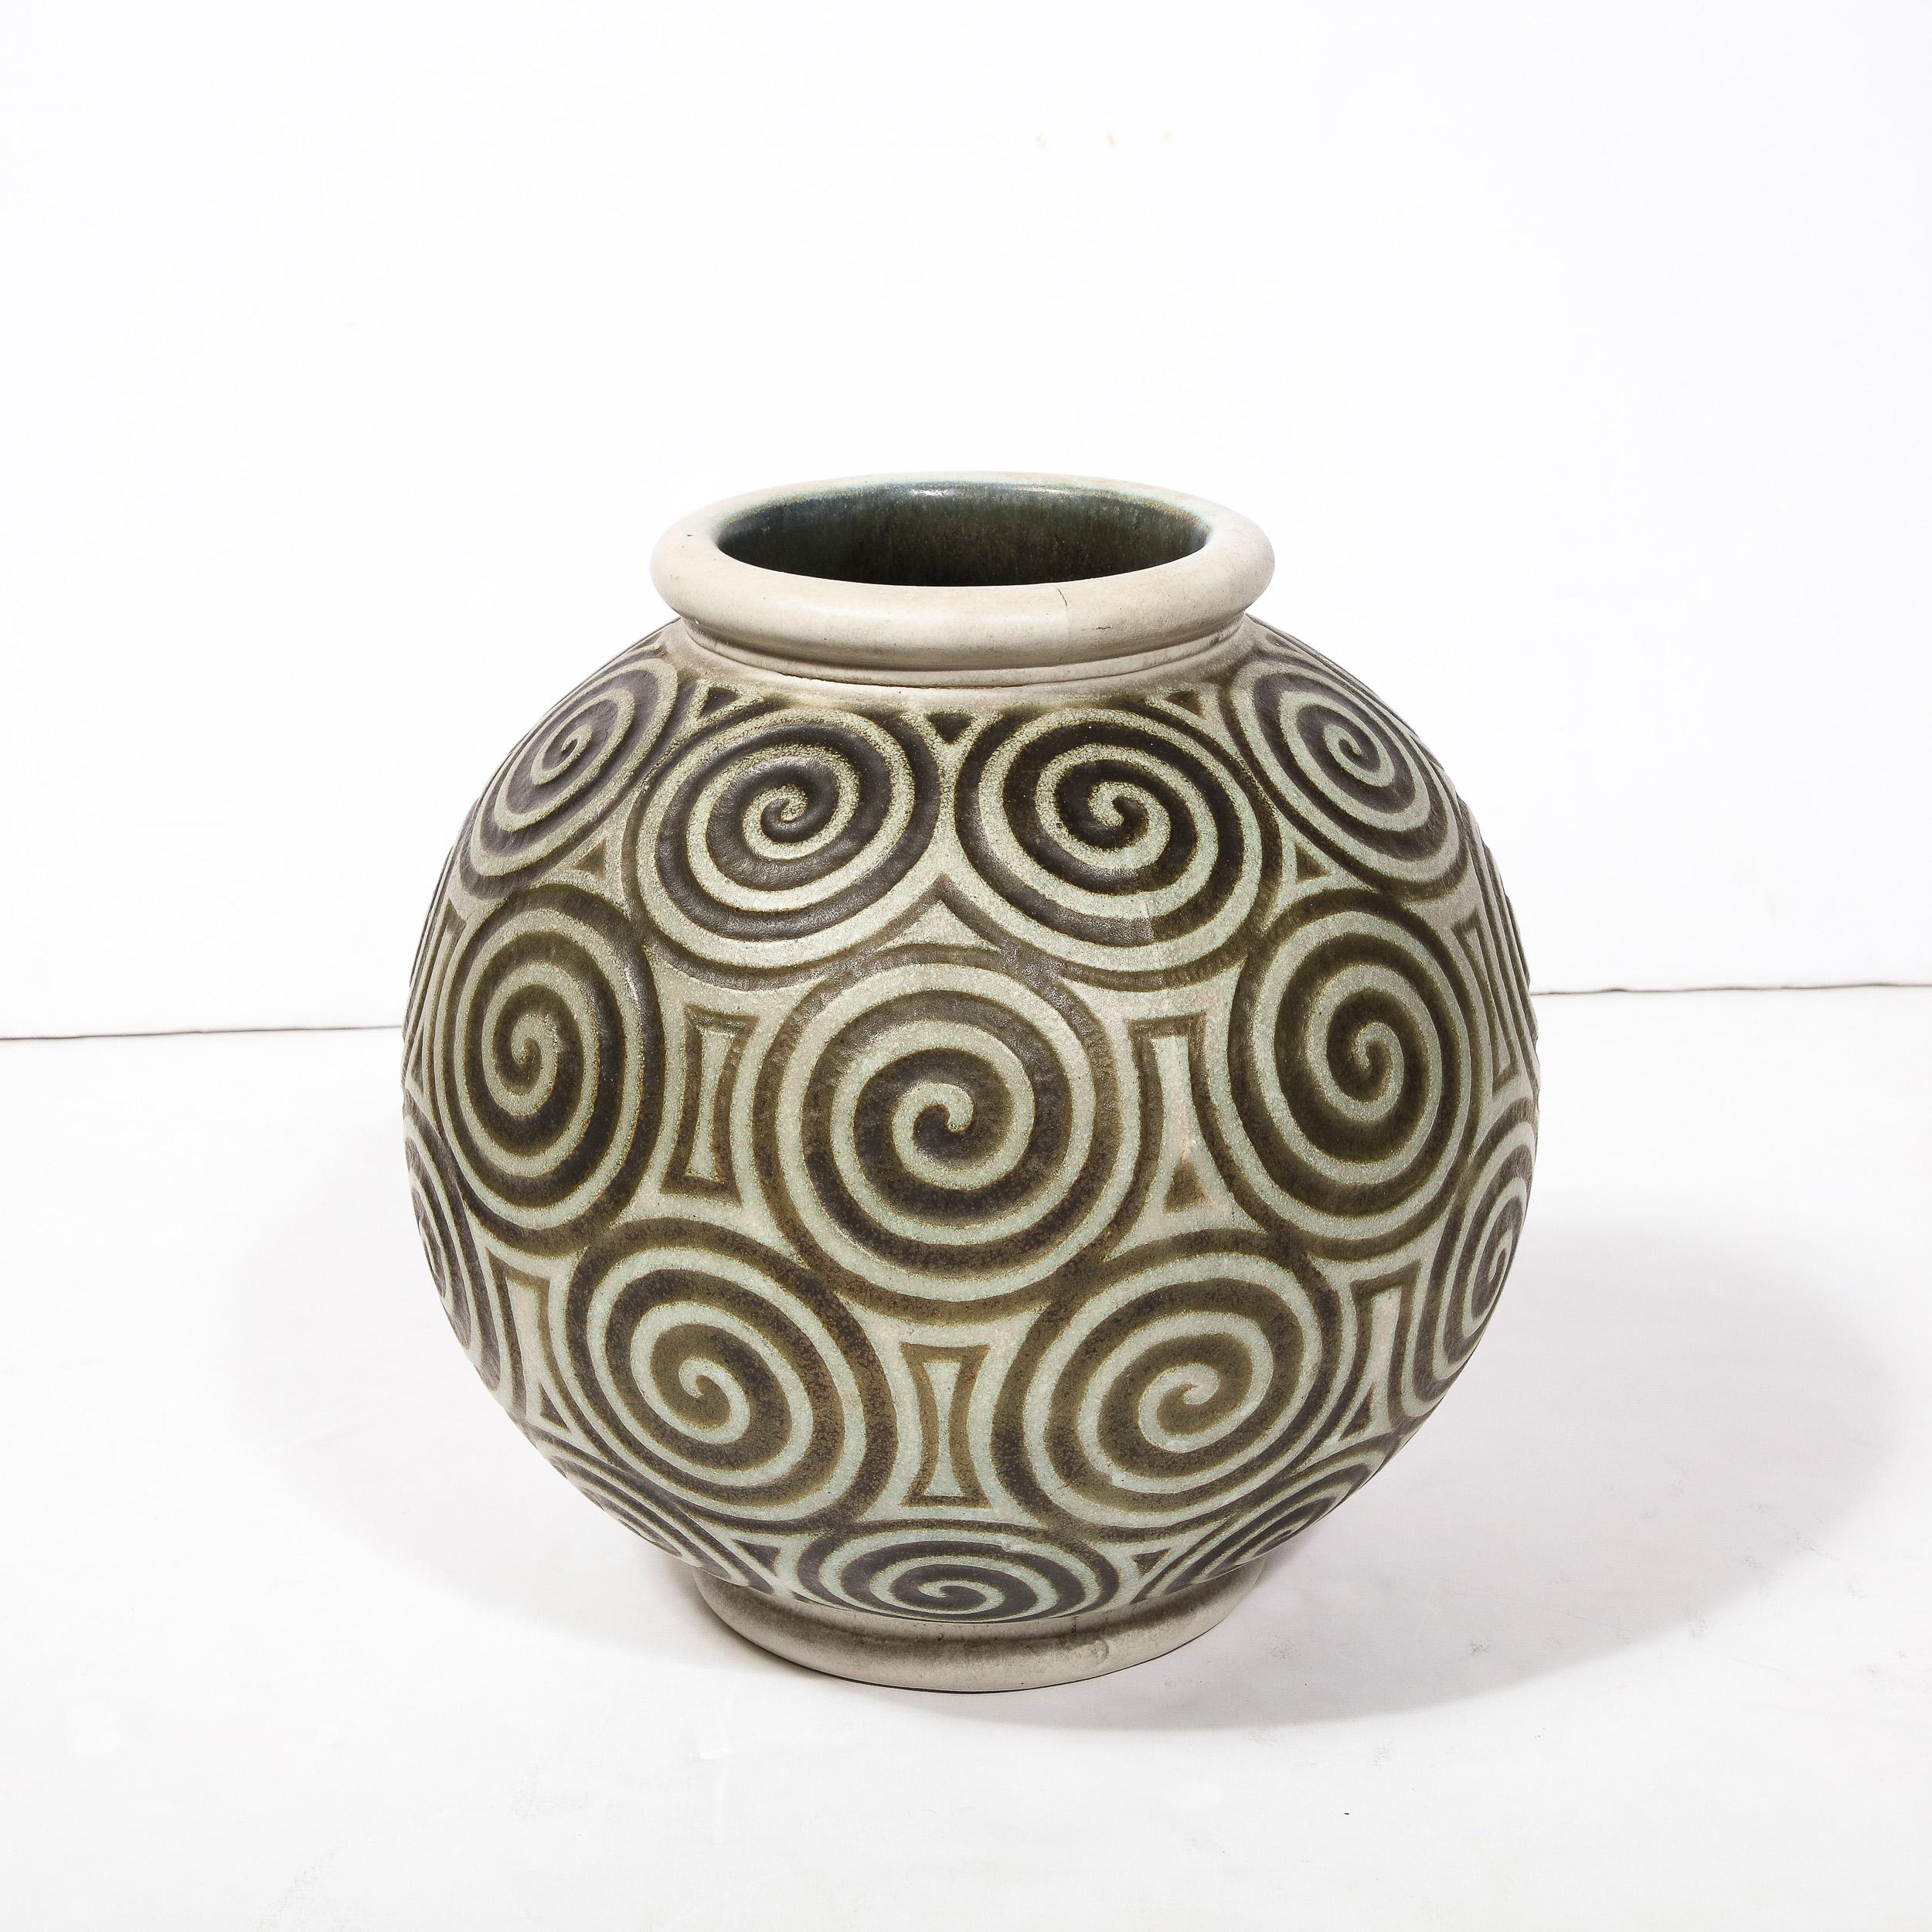 Early 20th Century Art Deco Ceramic Vase with Geometric Spirals in Relief By Joseph Mougin Nancy